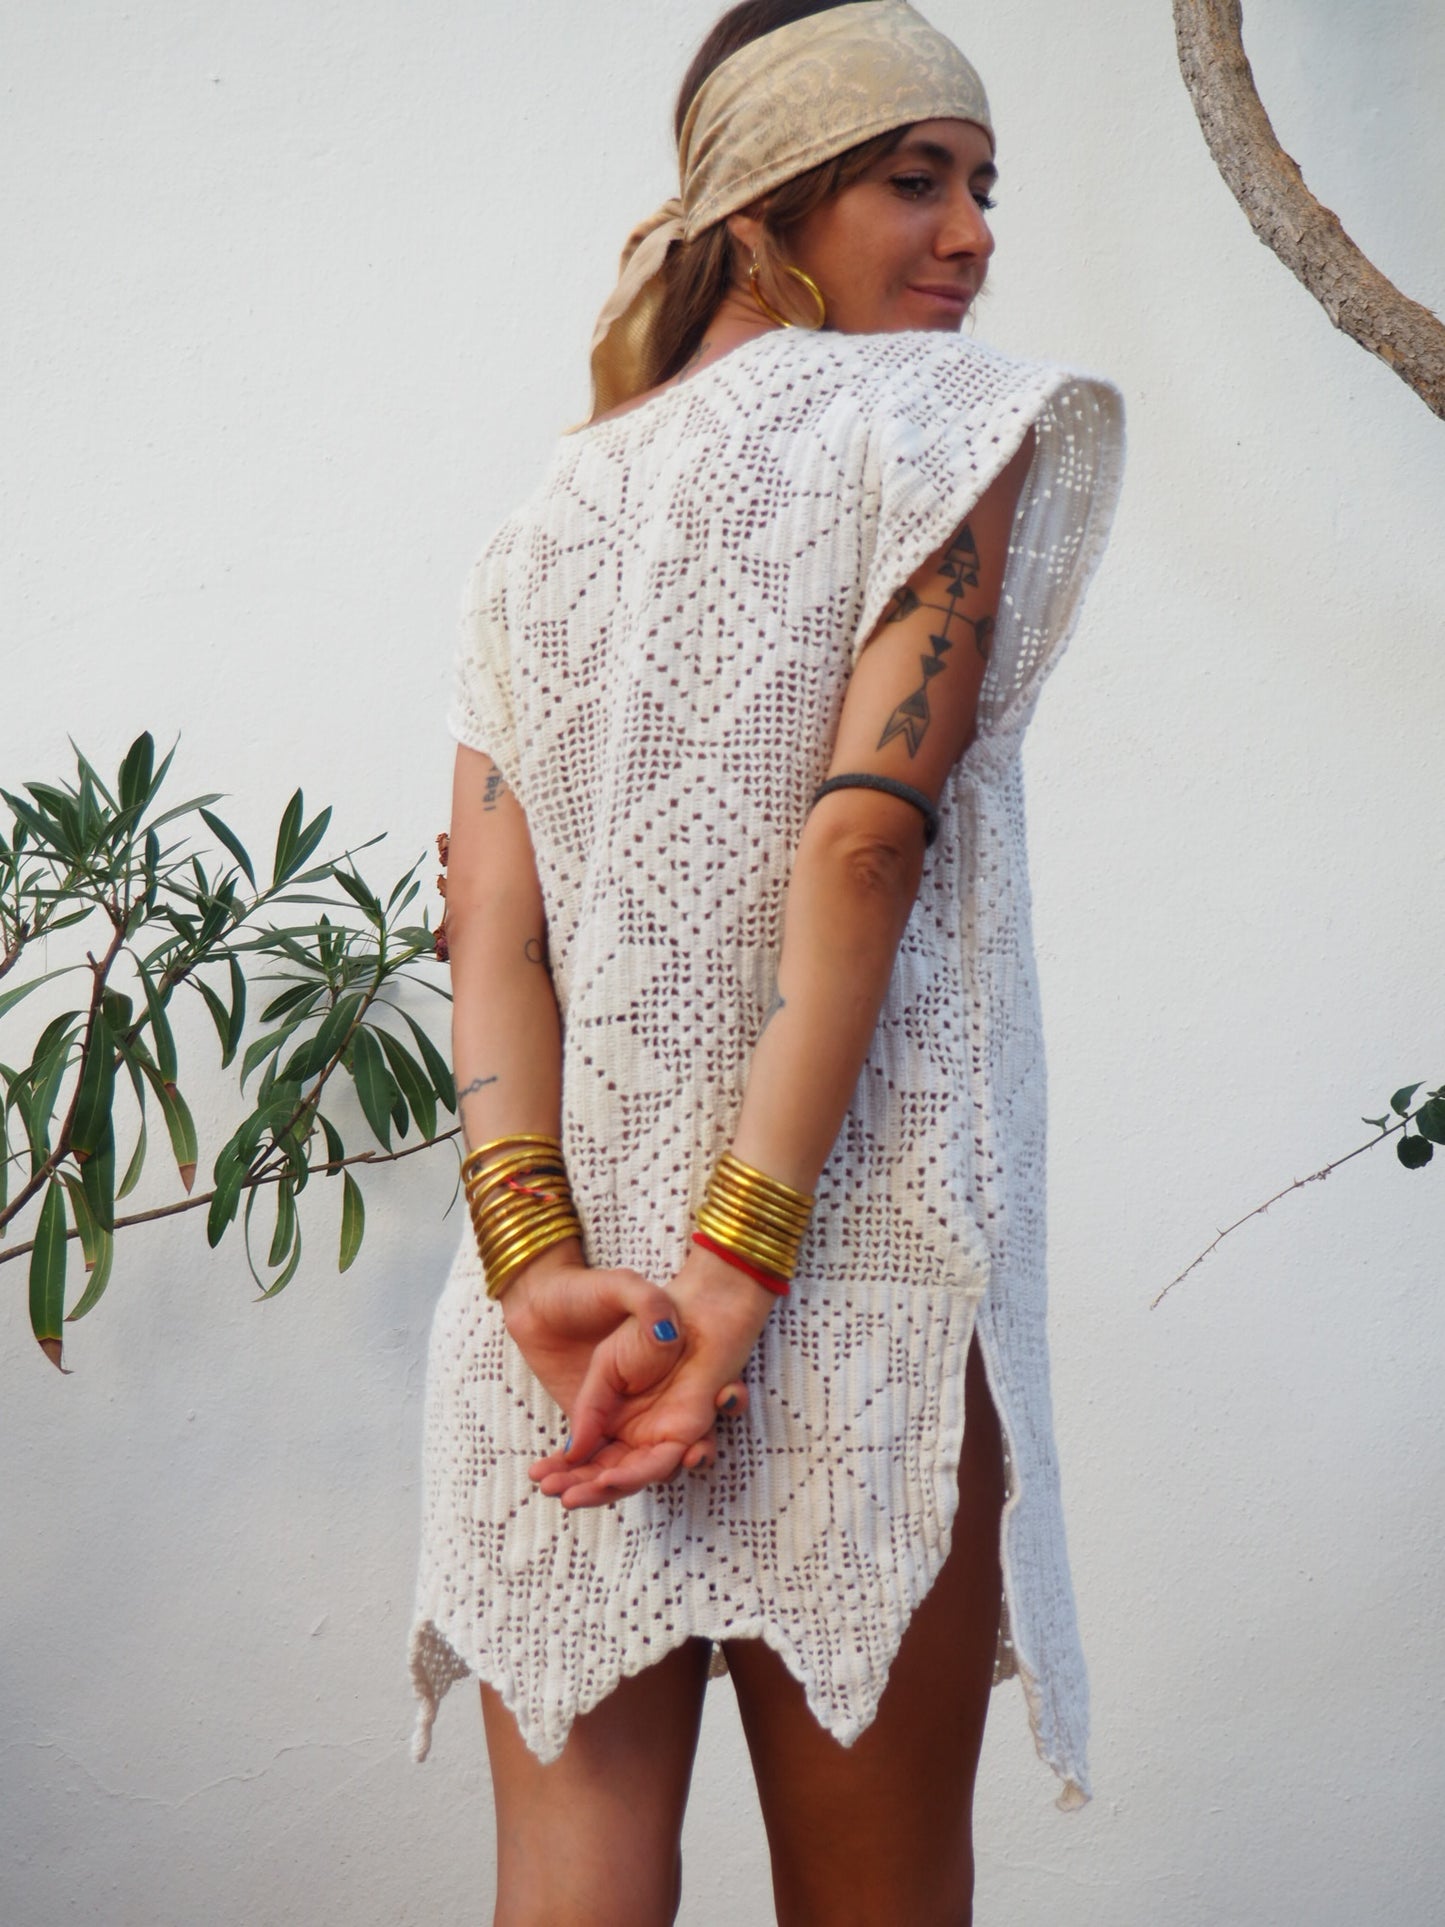 Amazing one off a kind white vintage crochet dress up-cycled by Vagabond Ibiza